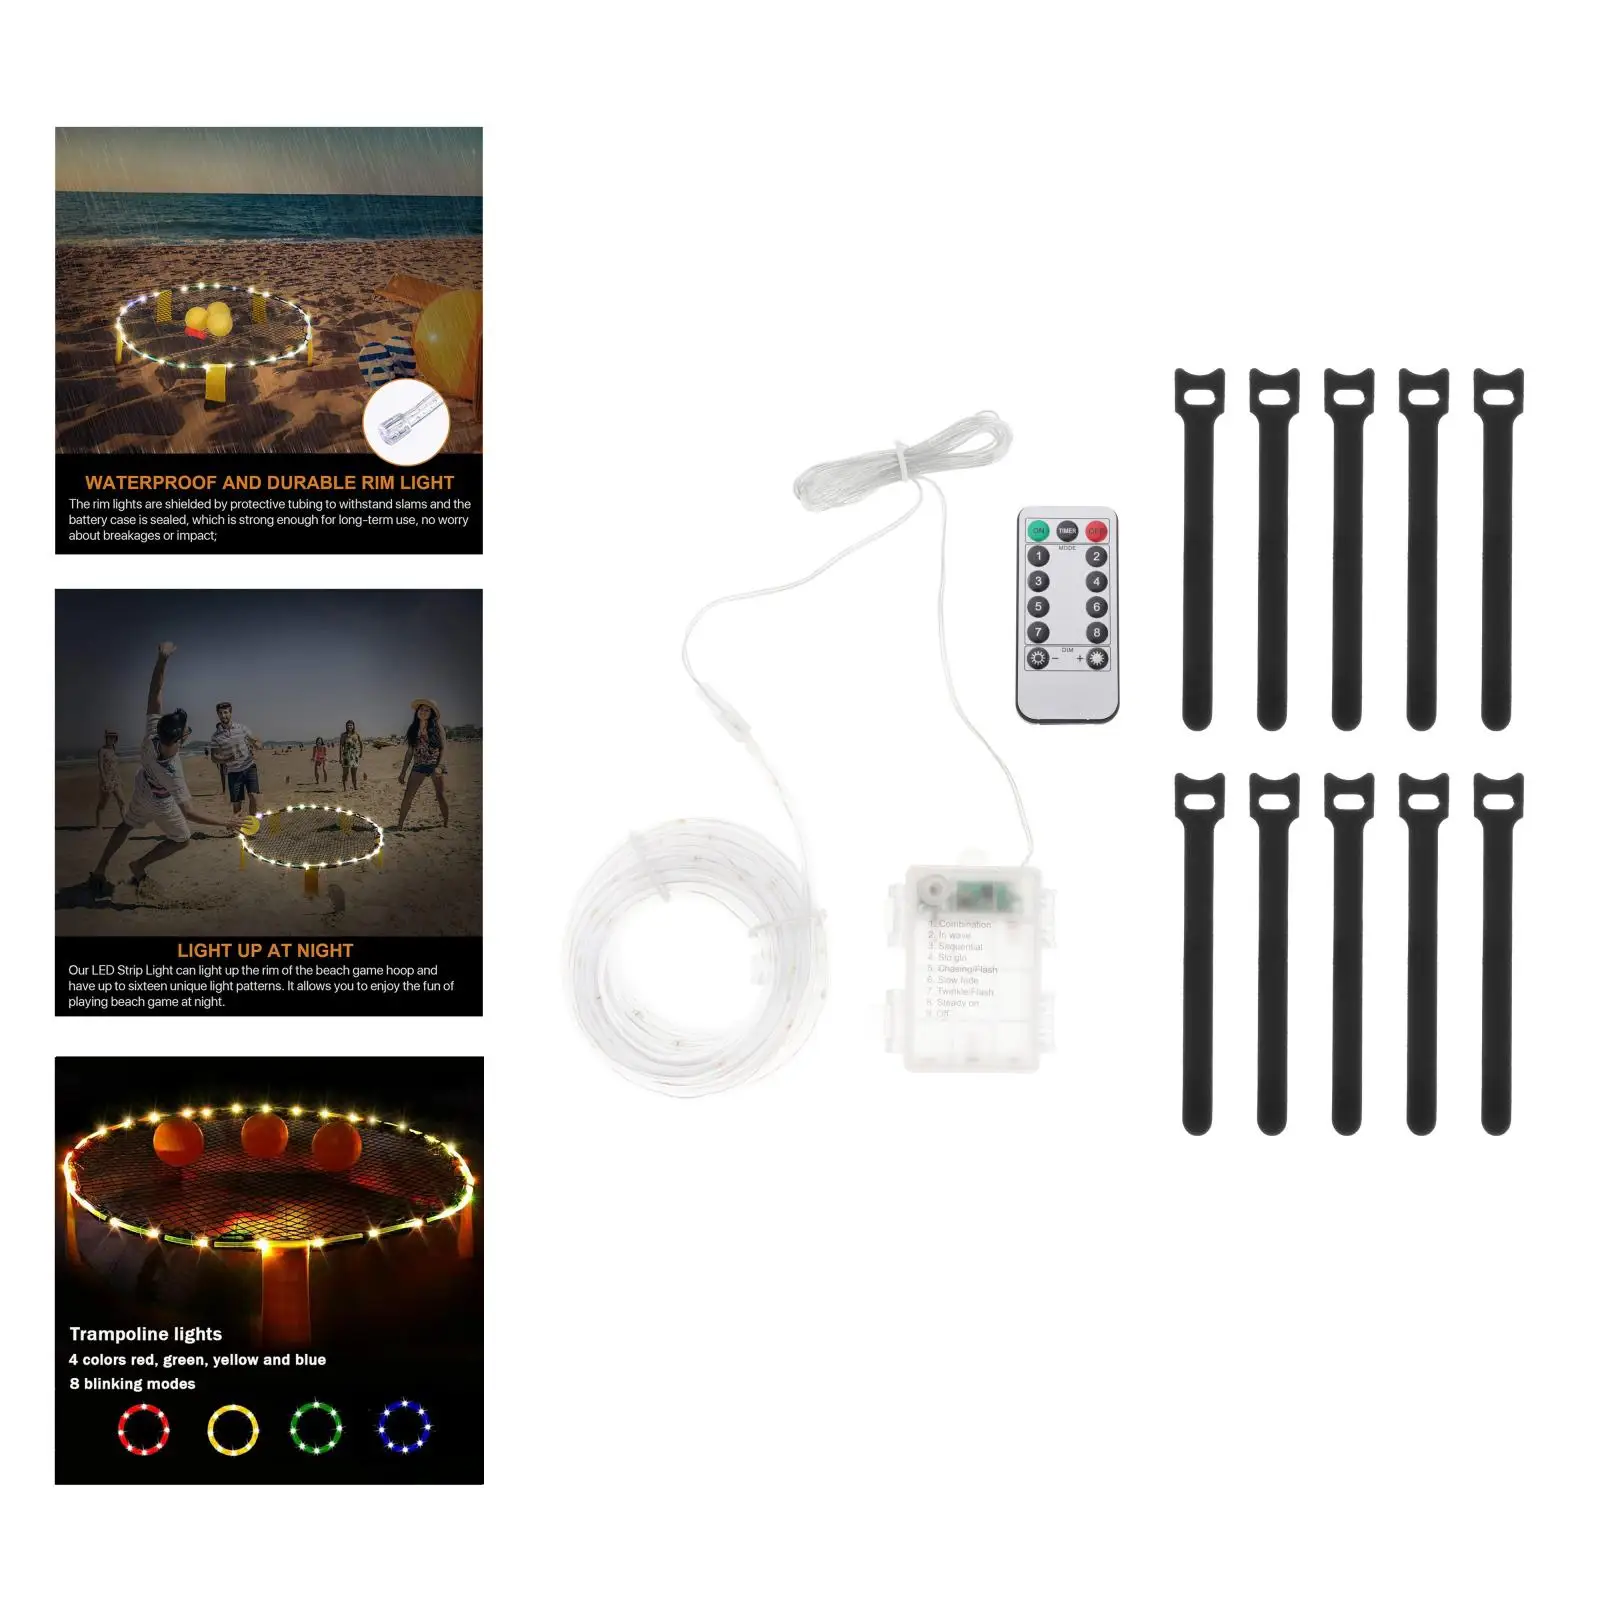 LED Trampoline Lights Rope String Strip Lights Battery Operated Outdoor Waterproof LED Light Christmas Decoration